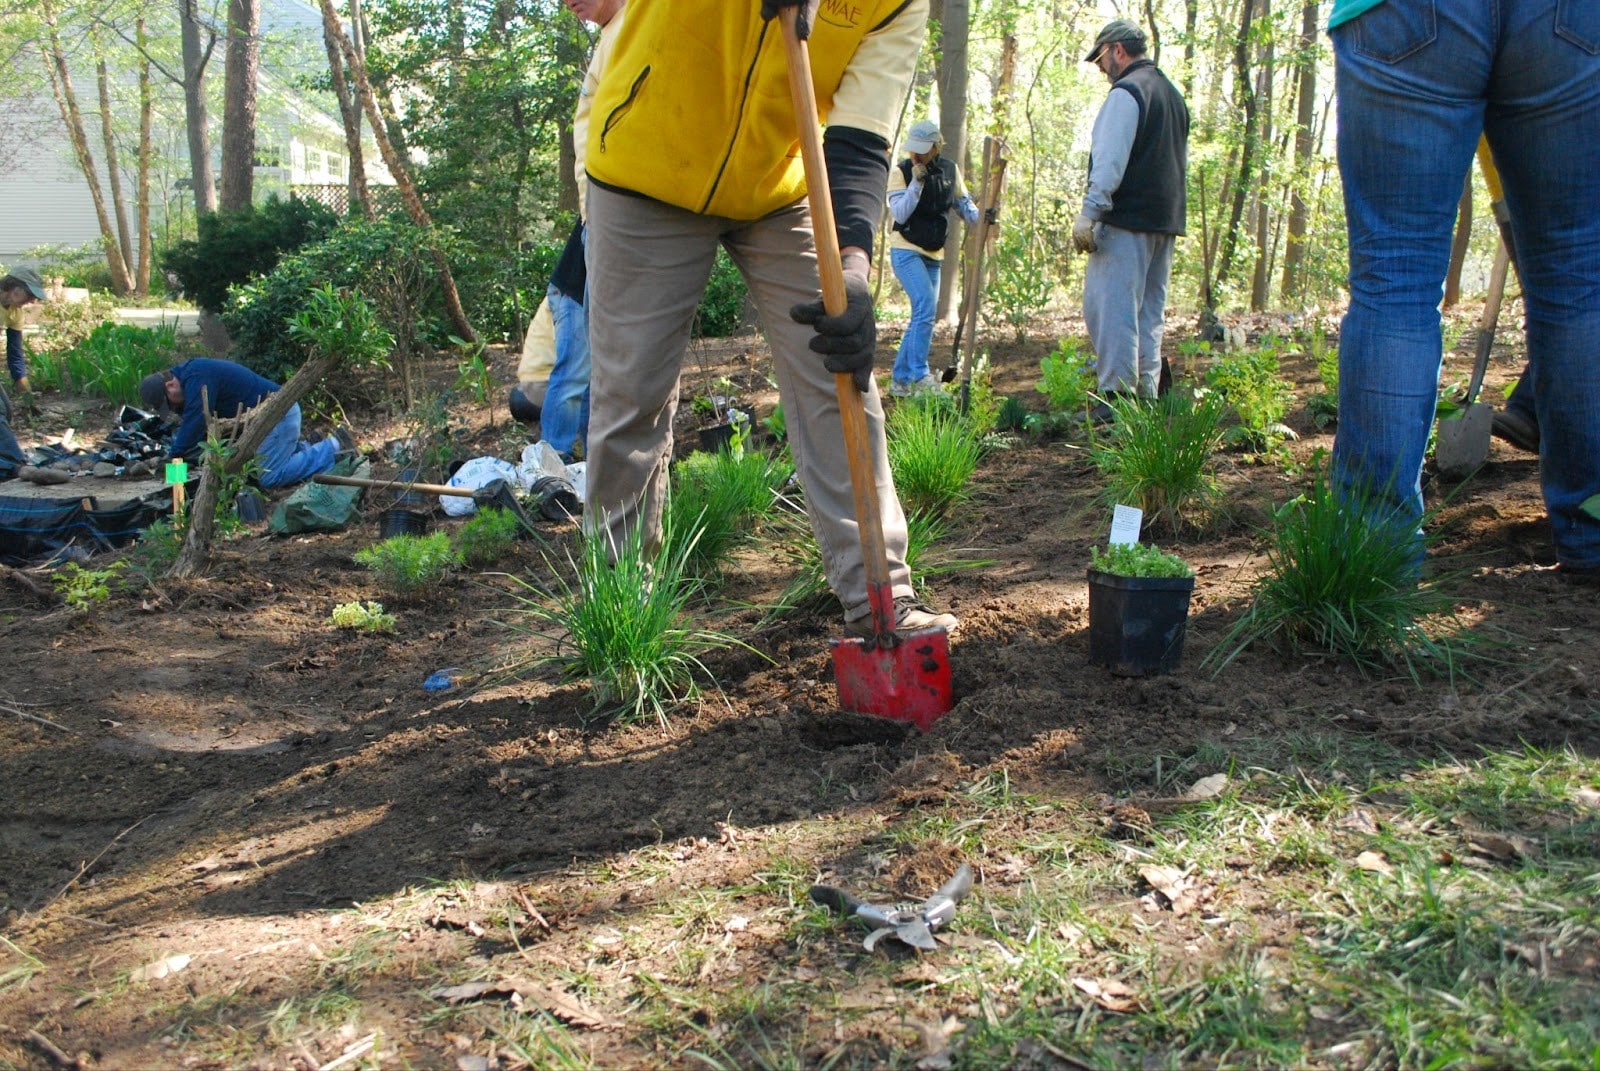 A group of people planting native grasses